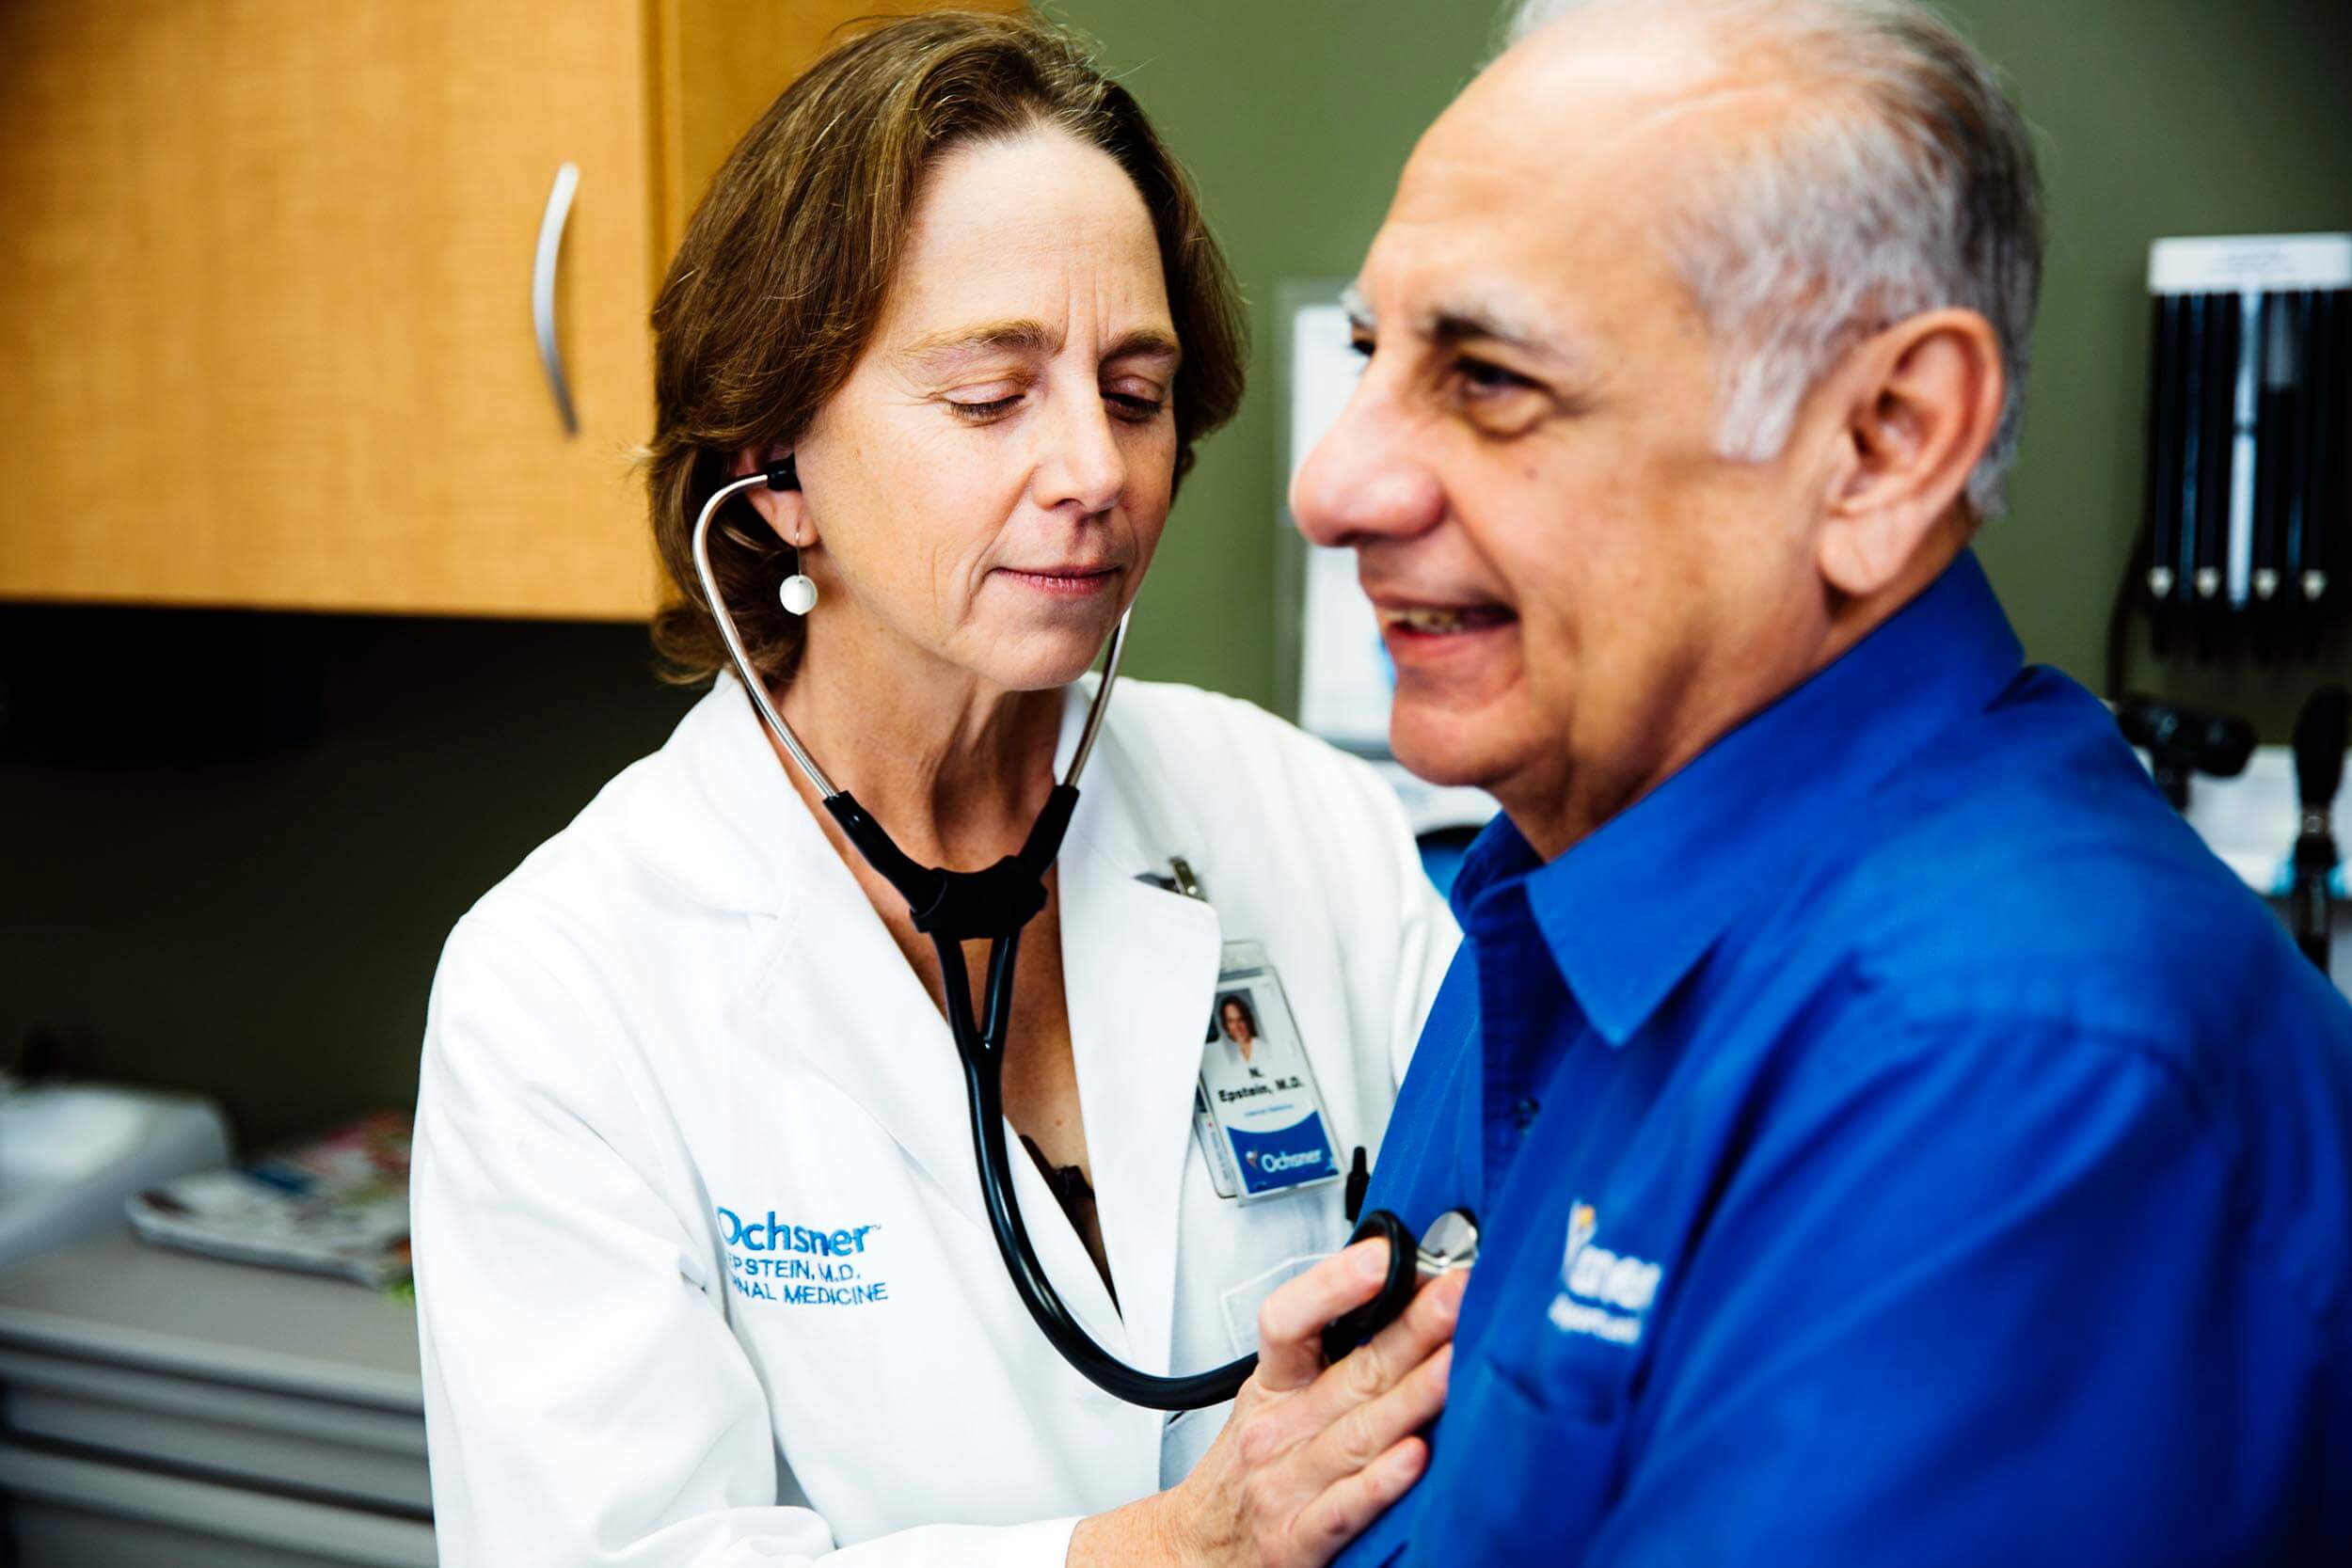 Female doctor checking pulse of older male patient using a stethoscope at Ochsner